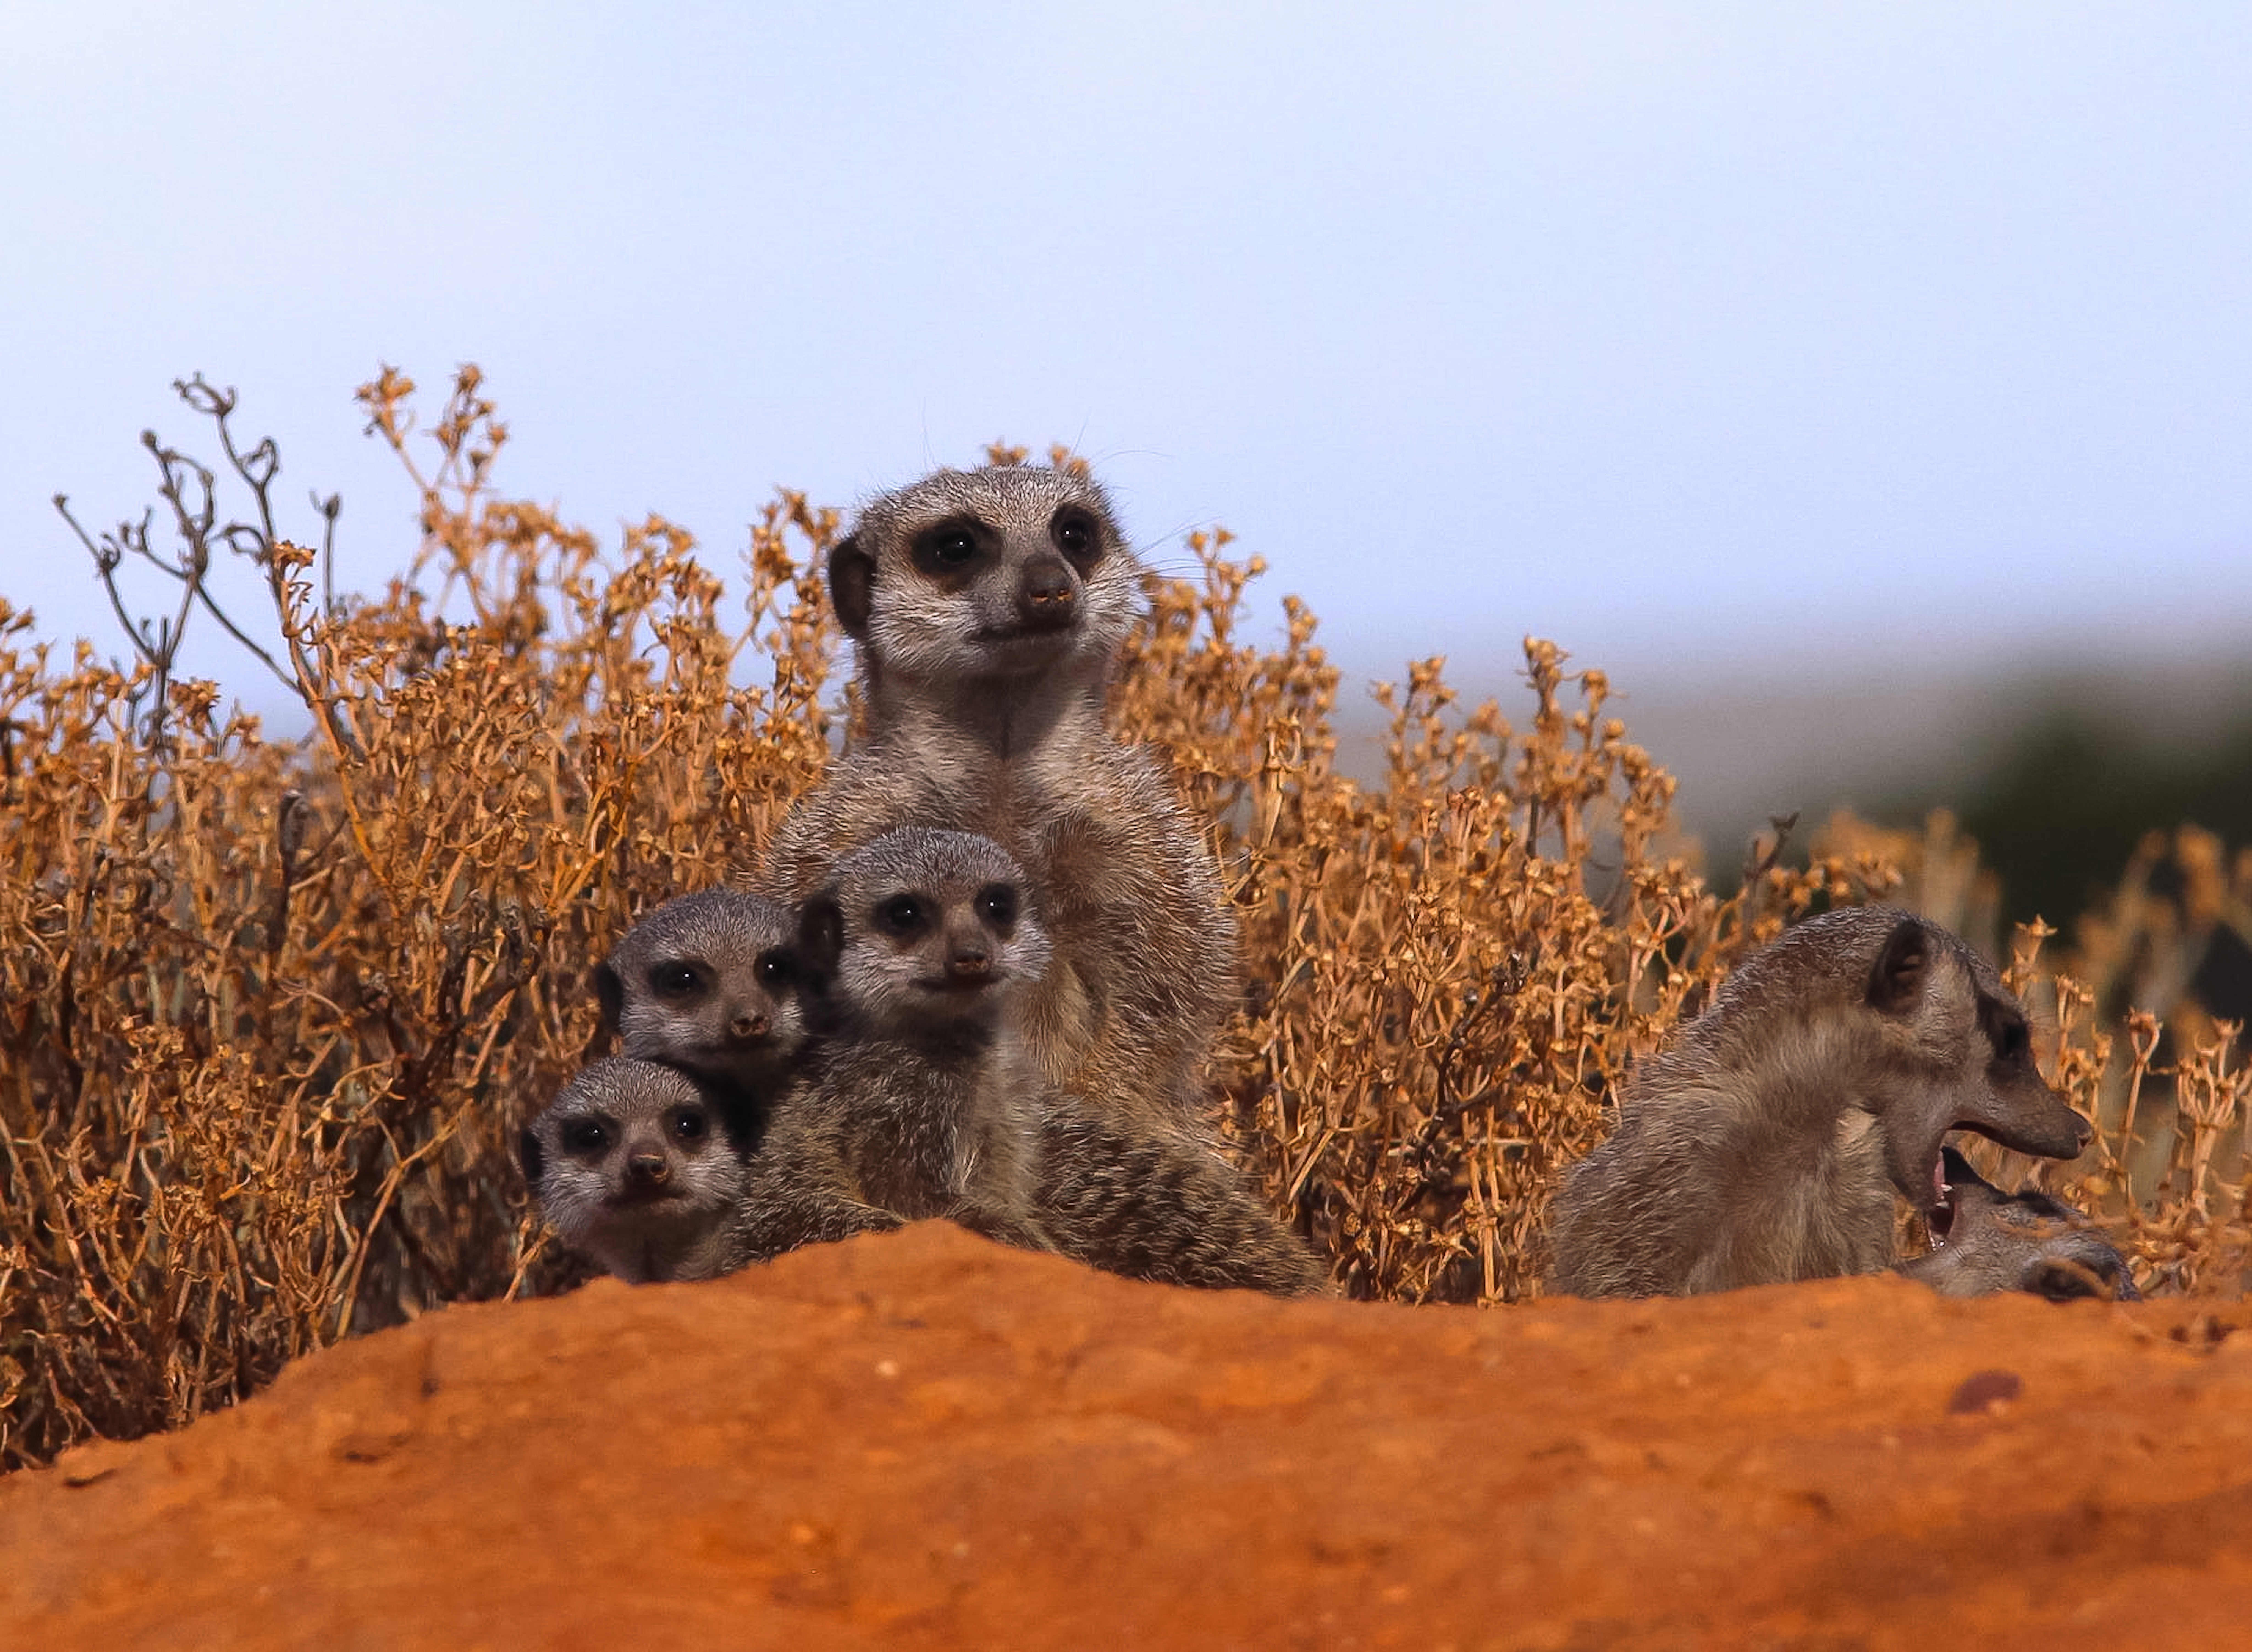 A group of meerkats looking over a ridge. Photo by Hugo Brightling on Unsplash